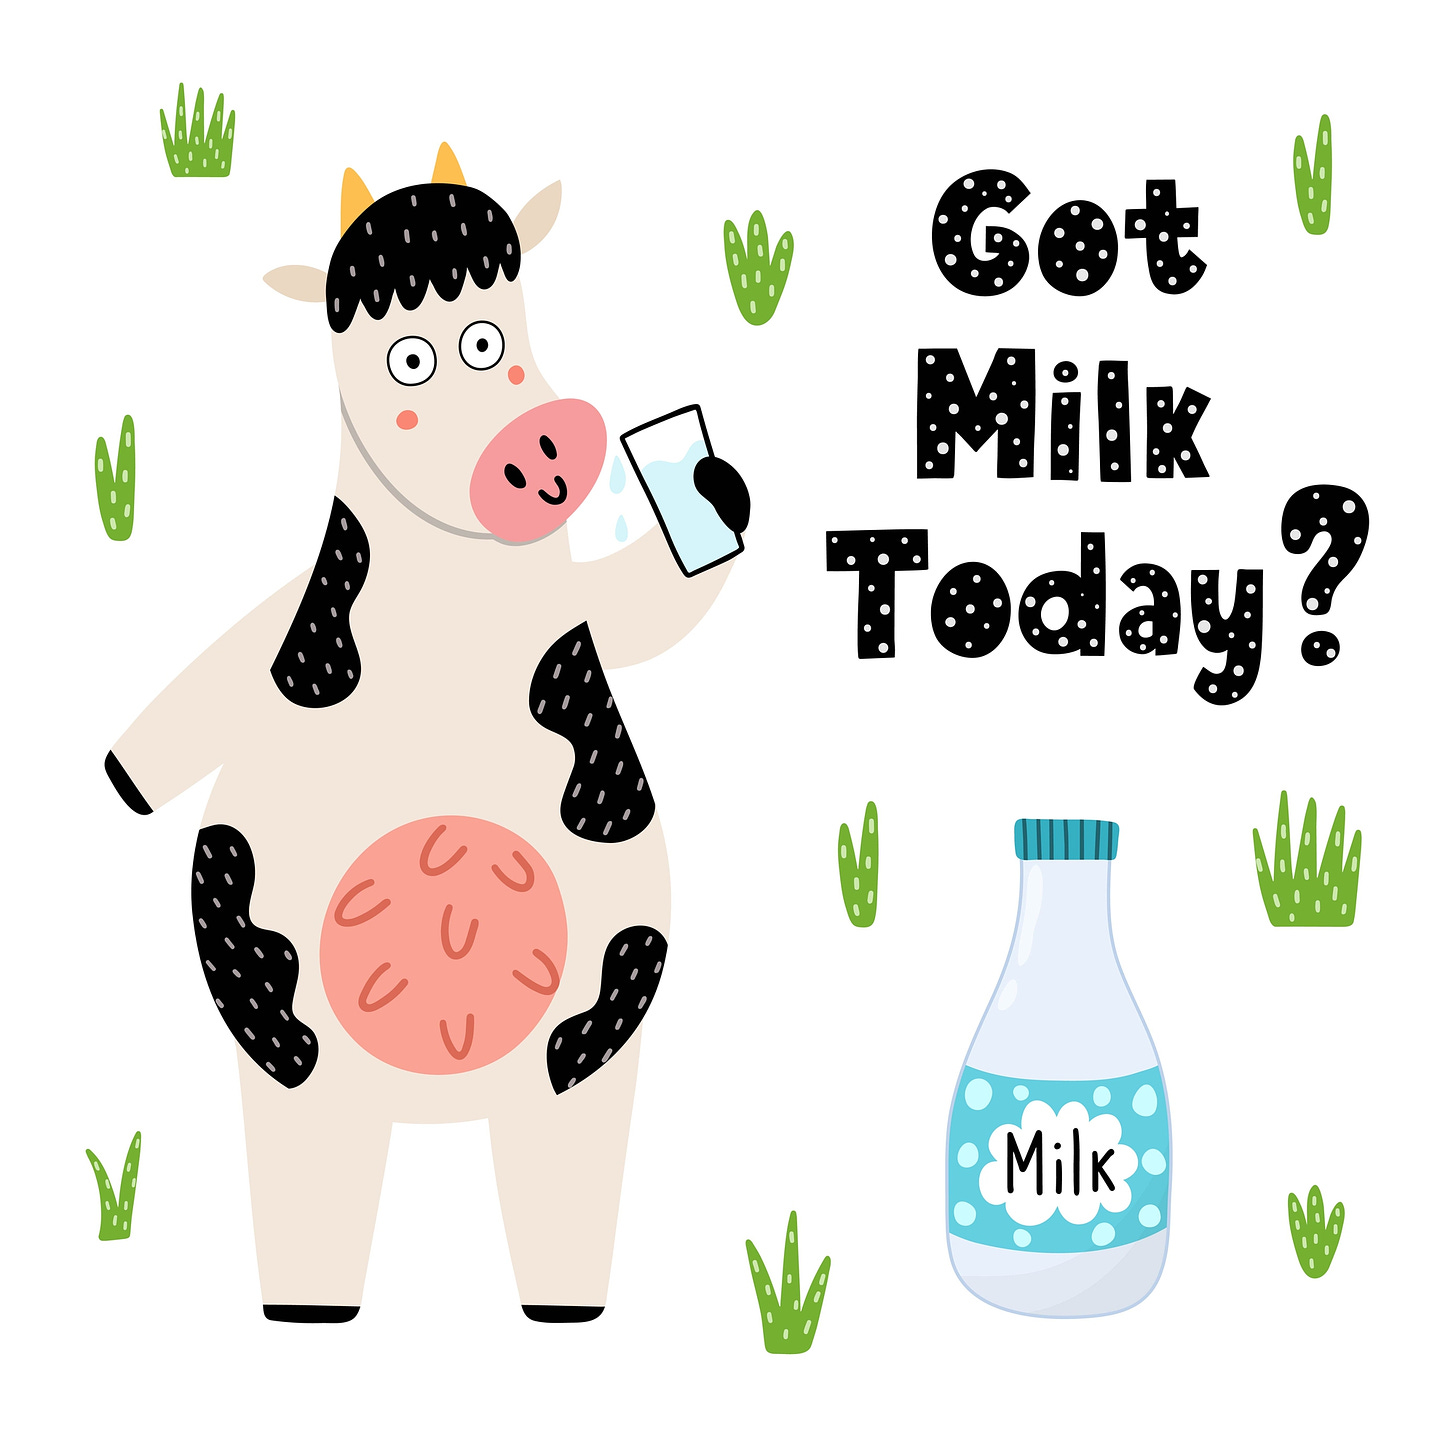 The "Got Milk?" campaign, launched in 1993, became iconic by using celebrities with milk mustaches in ads. Its memorable slogan and humorous approach highlighted the consequences of running out of milk, significantly boosting milk sales and brand recognition.